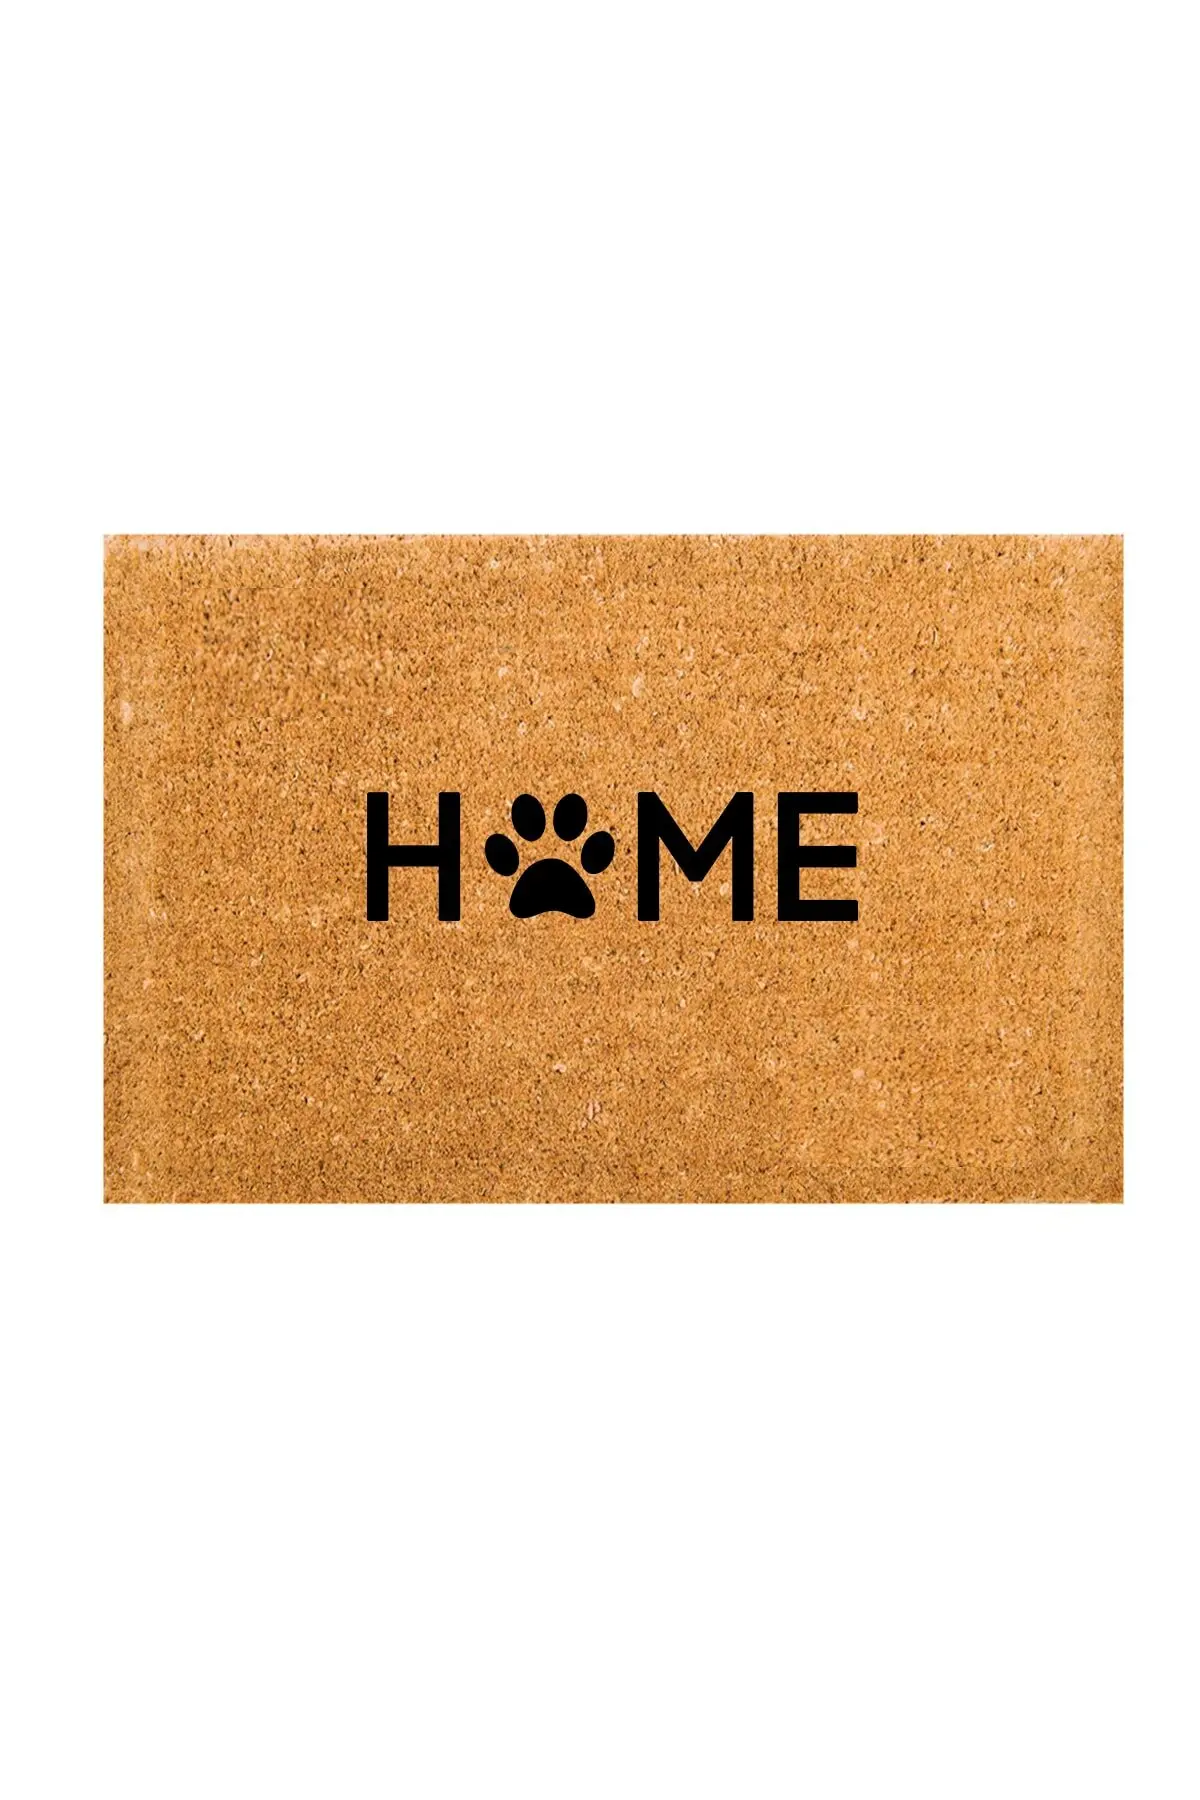 

Home Doormat Outdoor Dust Removal Wear-resistant Anti-skid Entrance Door Mat Scraping Mud and Sand Removing Foot Pad